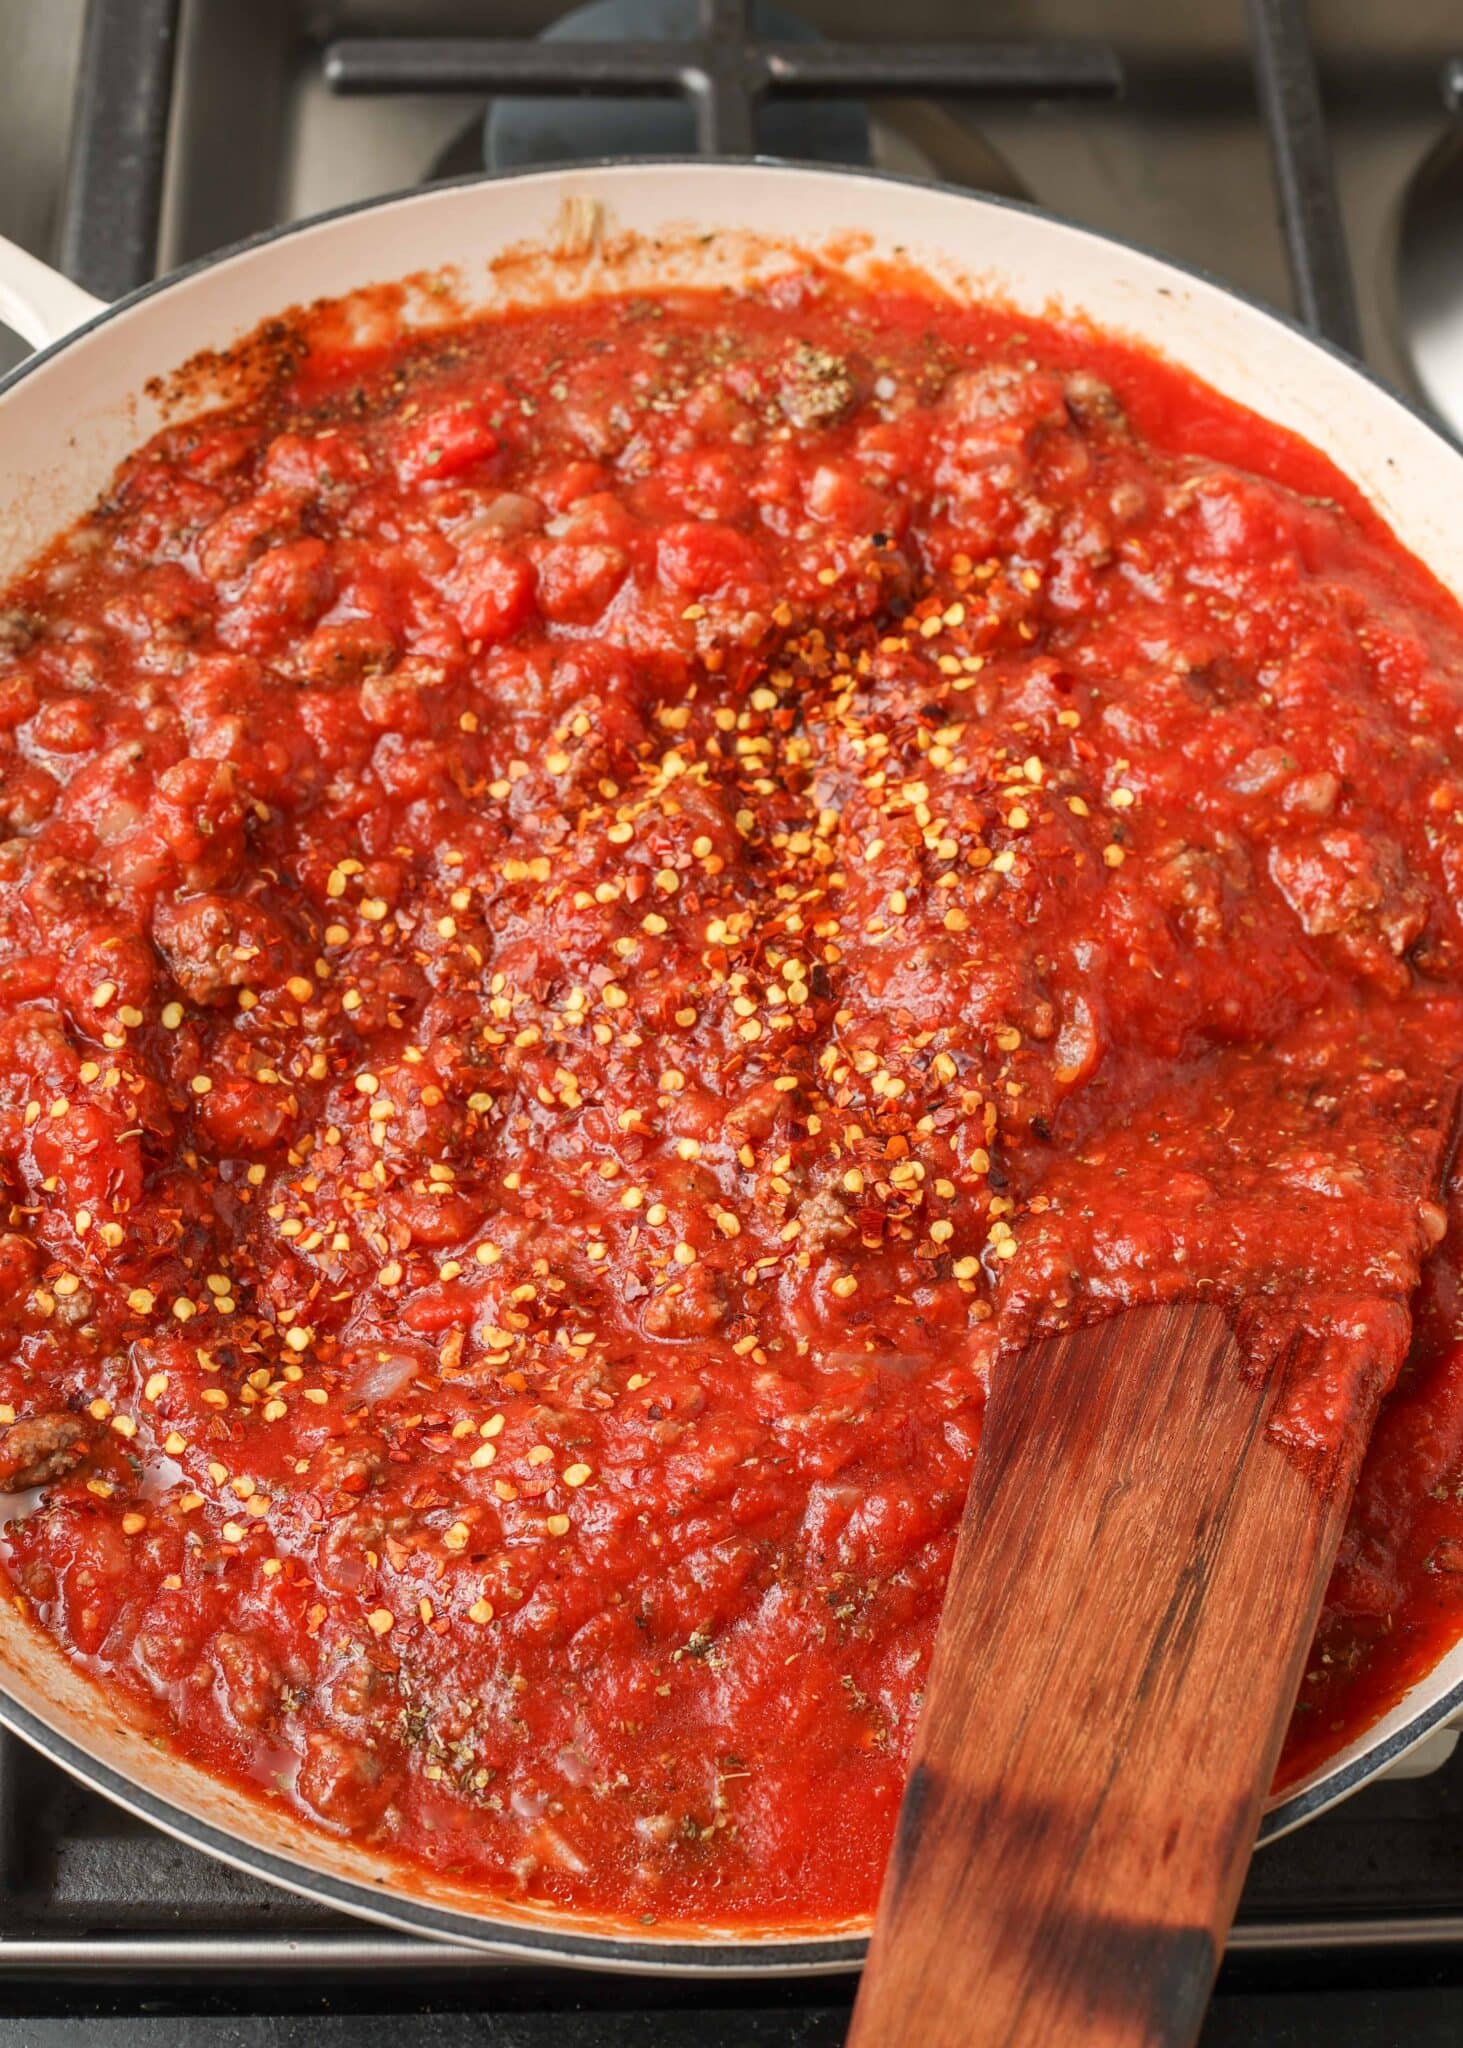 Finished spaghetti sauce with ground beef simmers in a white skillet with a wooden spatula